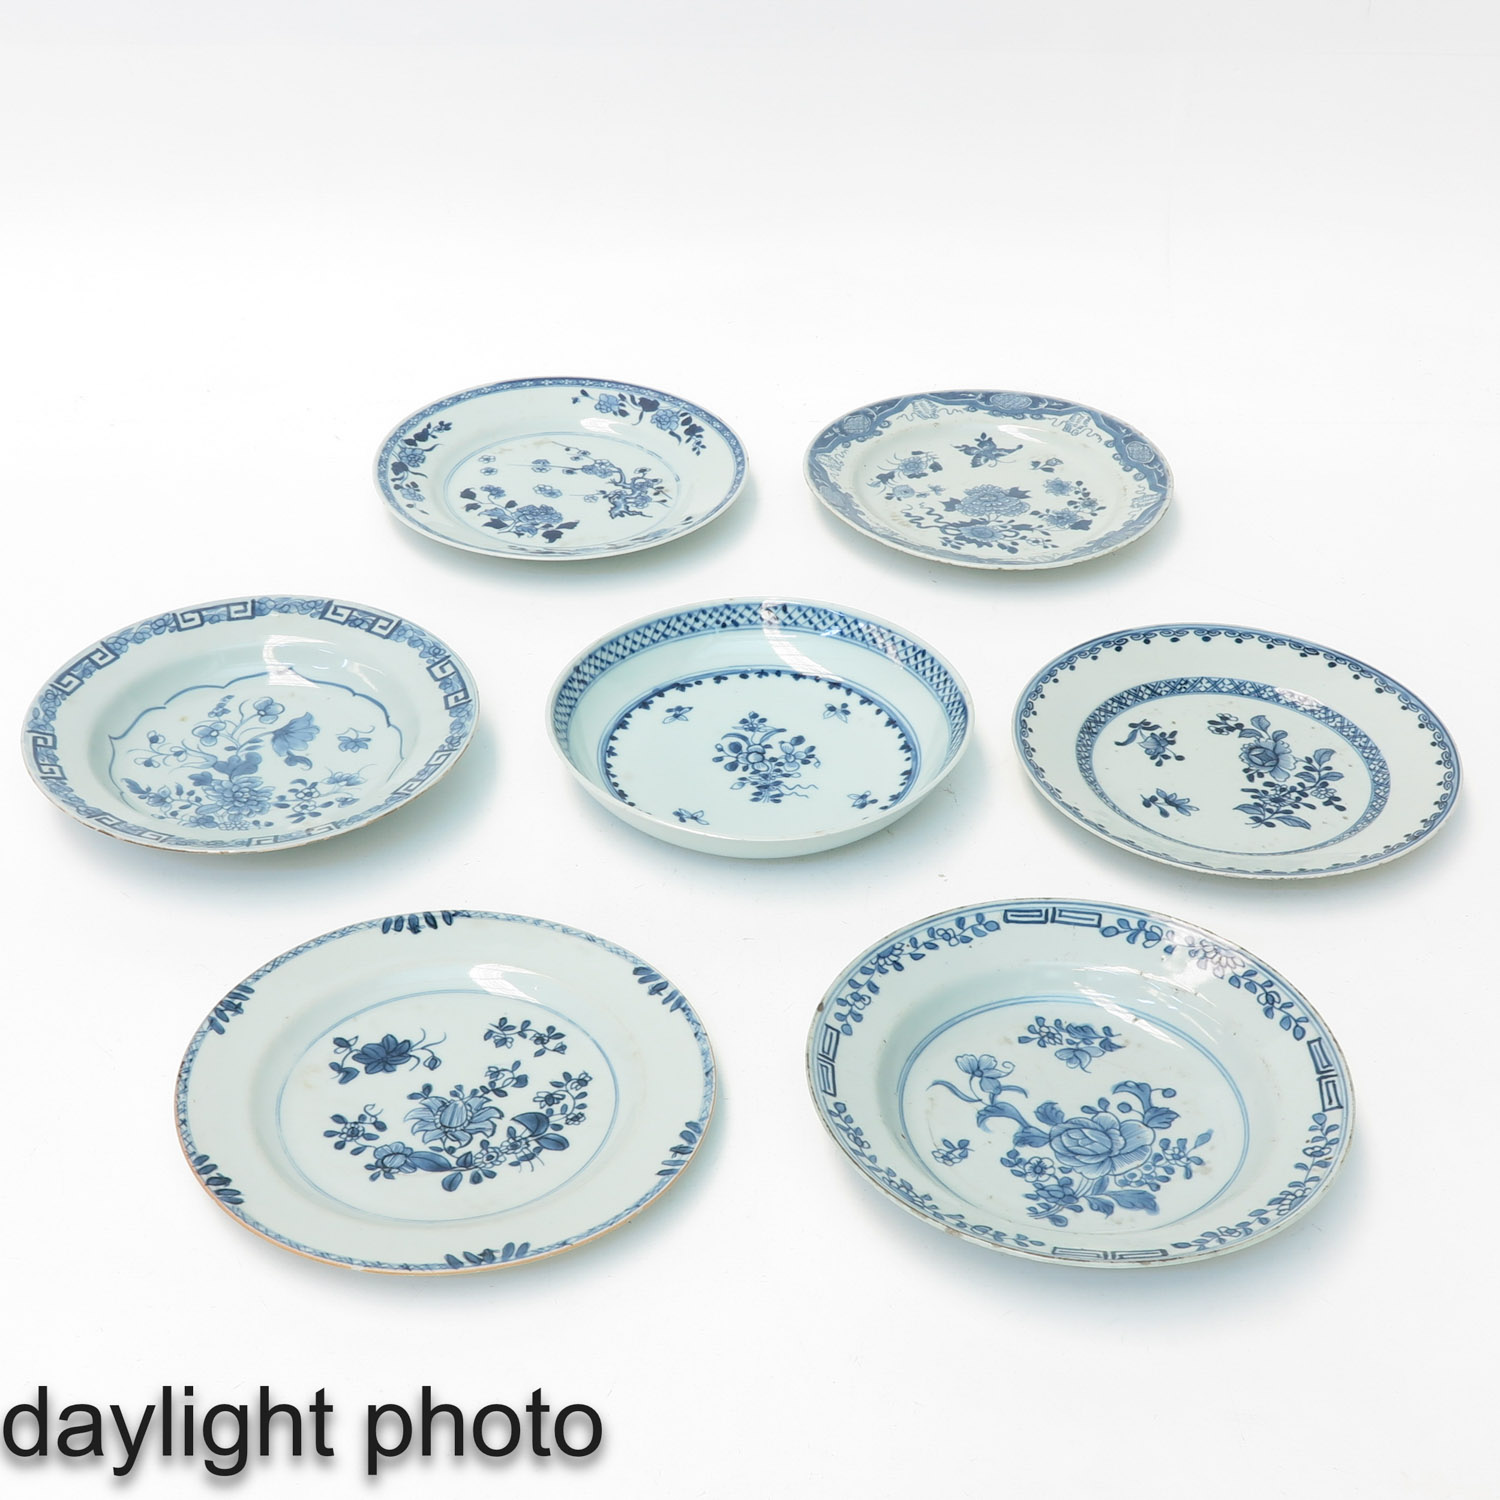 A Collection of 7 Blue and White Plates - Image 9 of 10